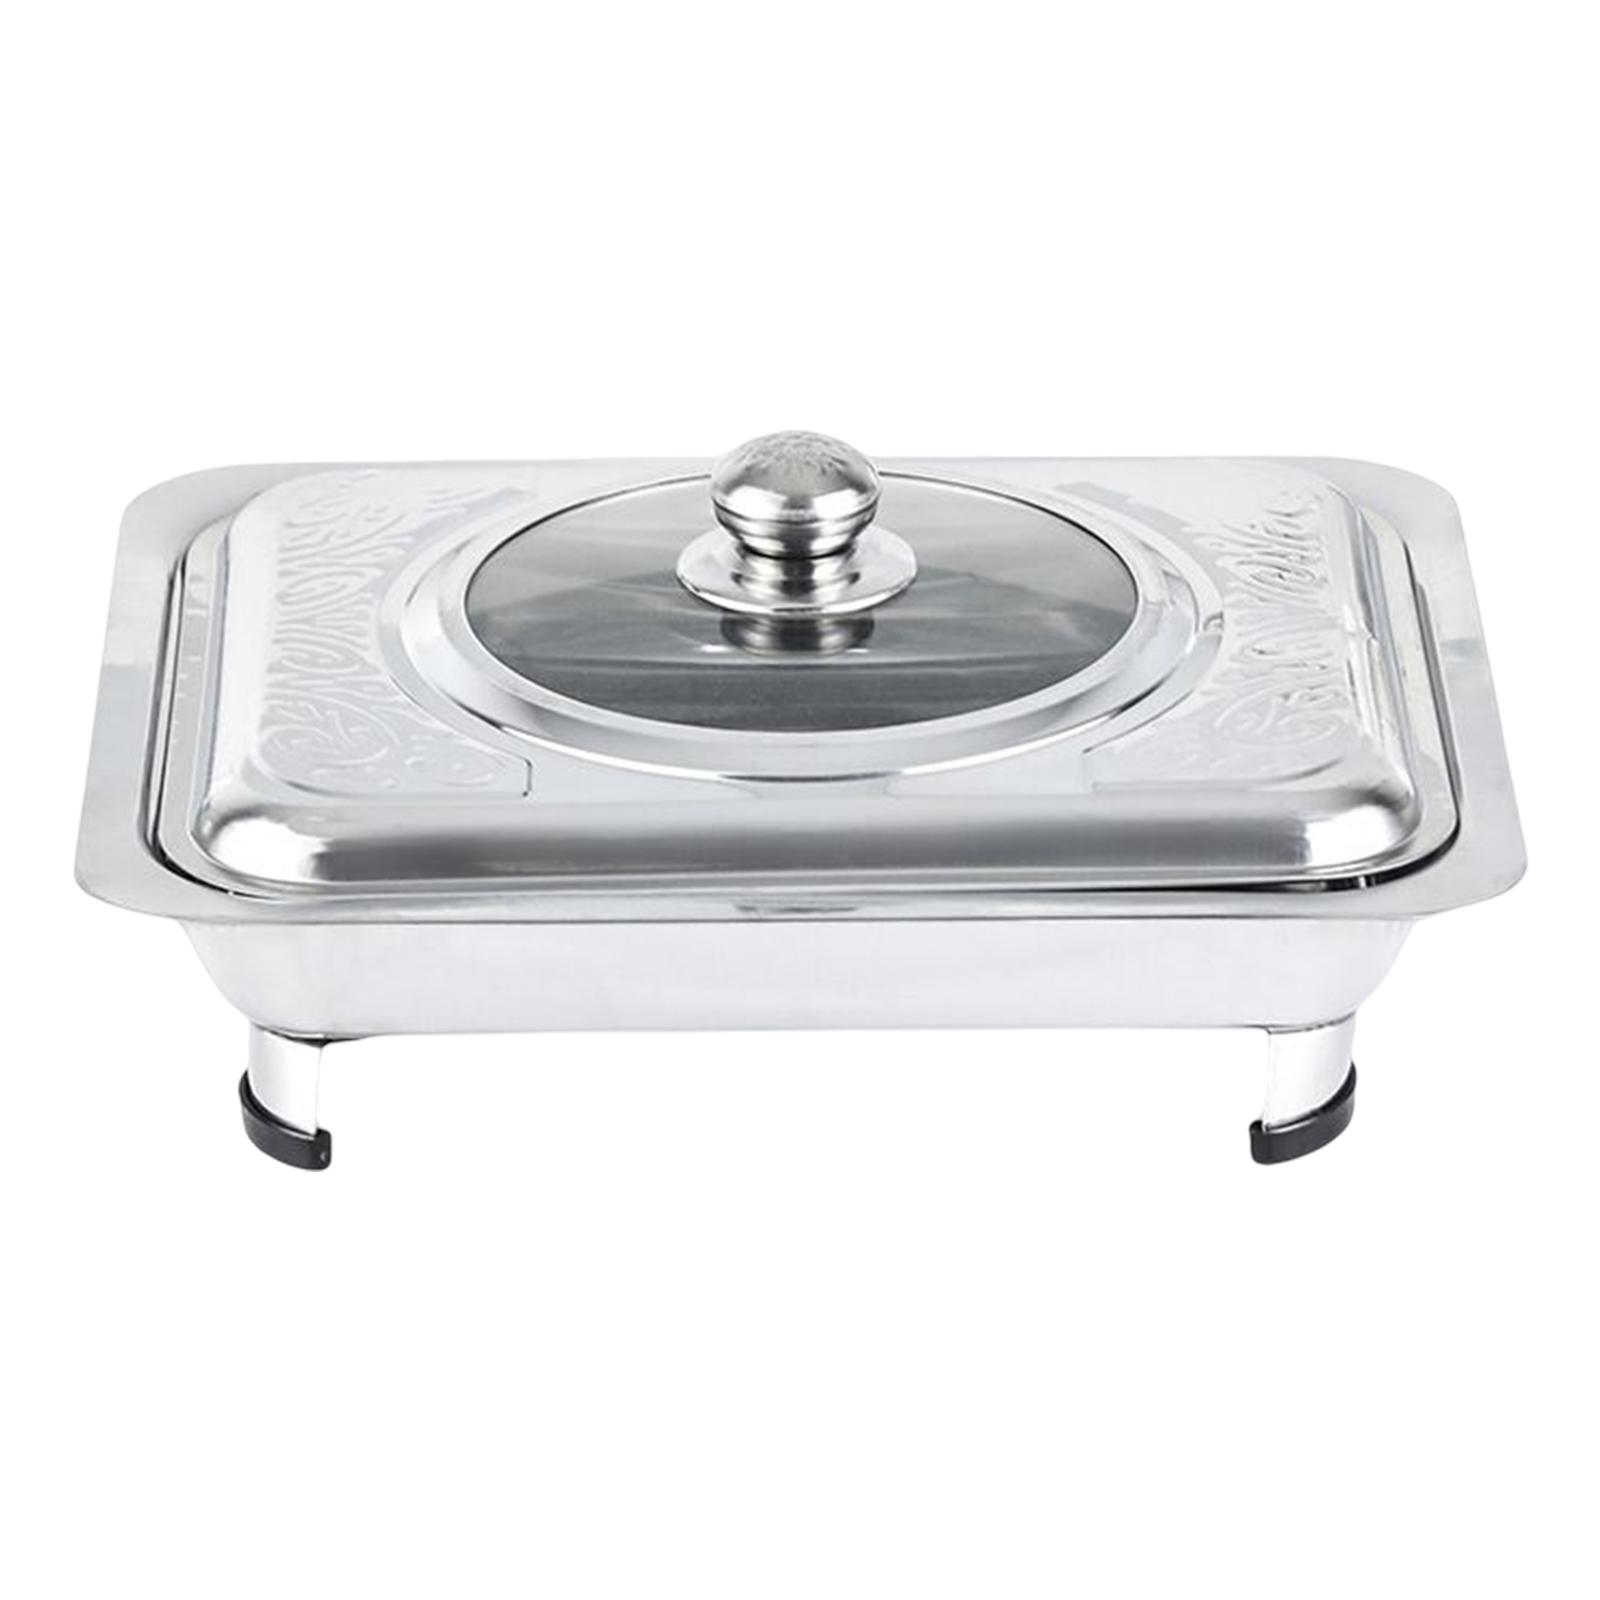 Stainless Steel Serving Tray Holder with Lids,Rectangular Basin Chafing Dish,Warming  Tray for Catering Dinners Parties StyleA